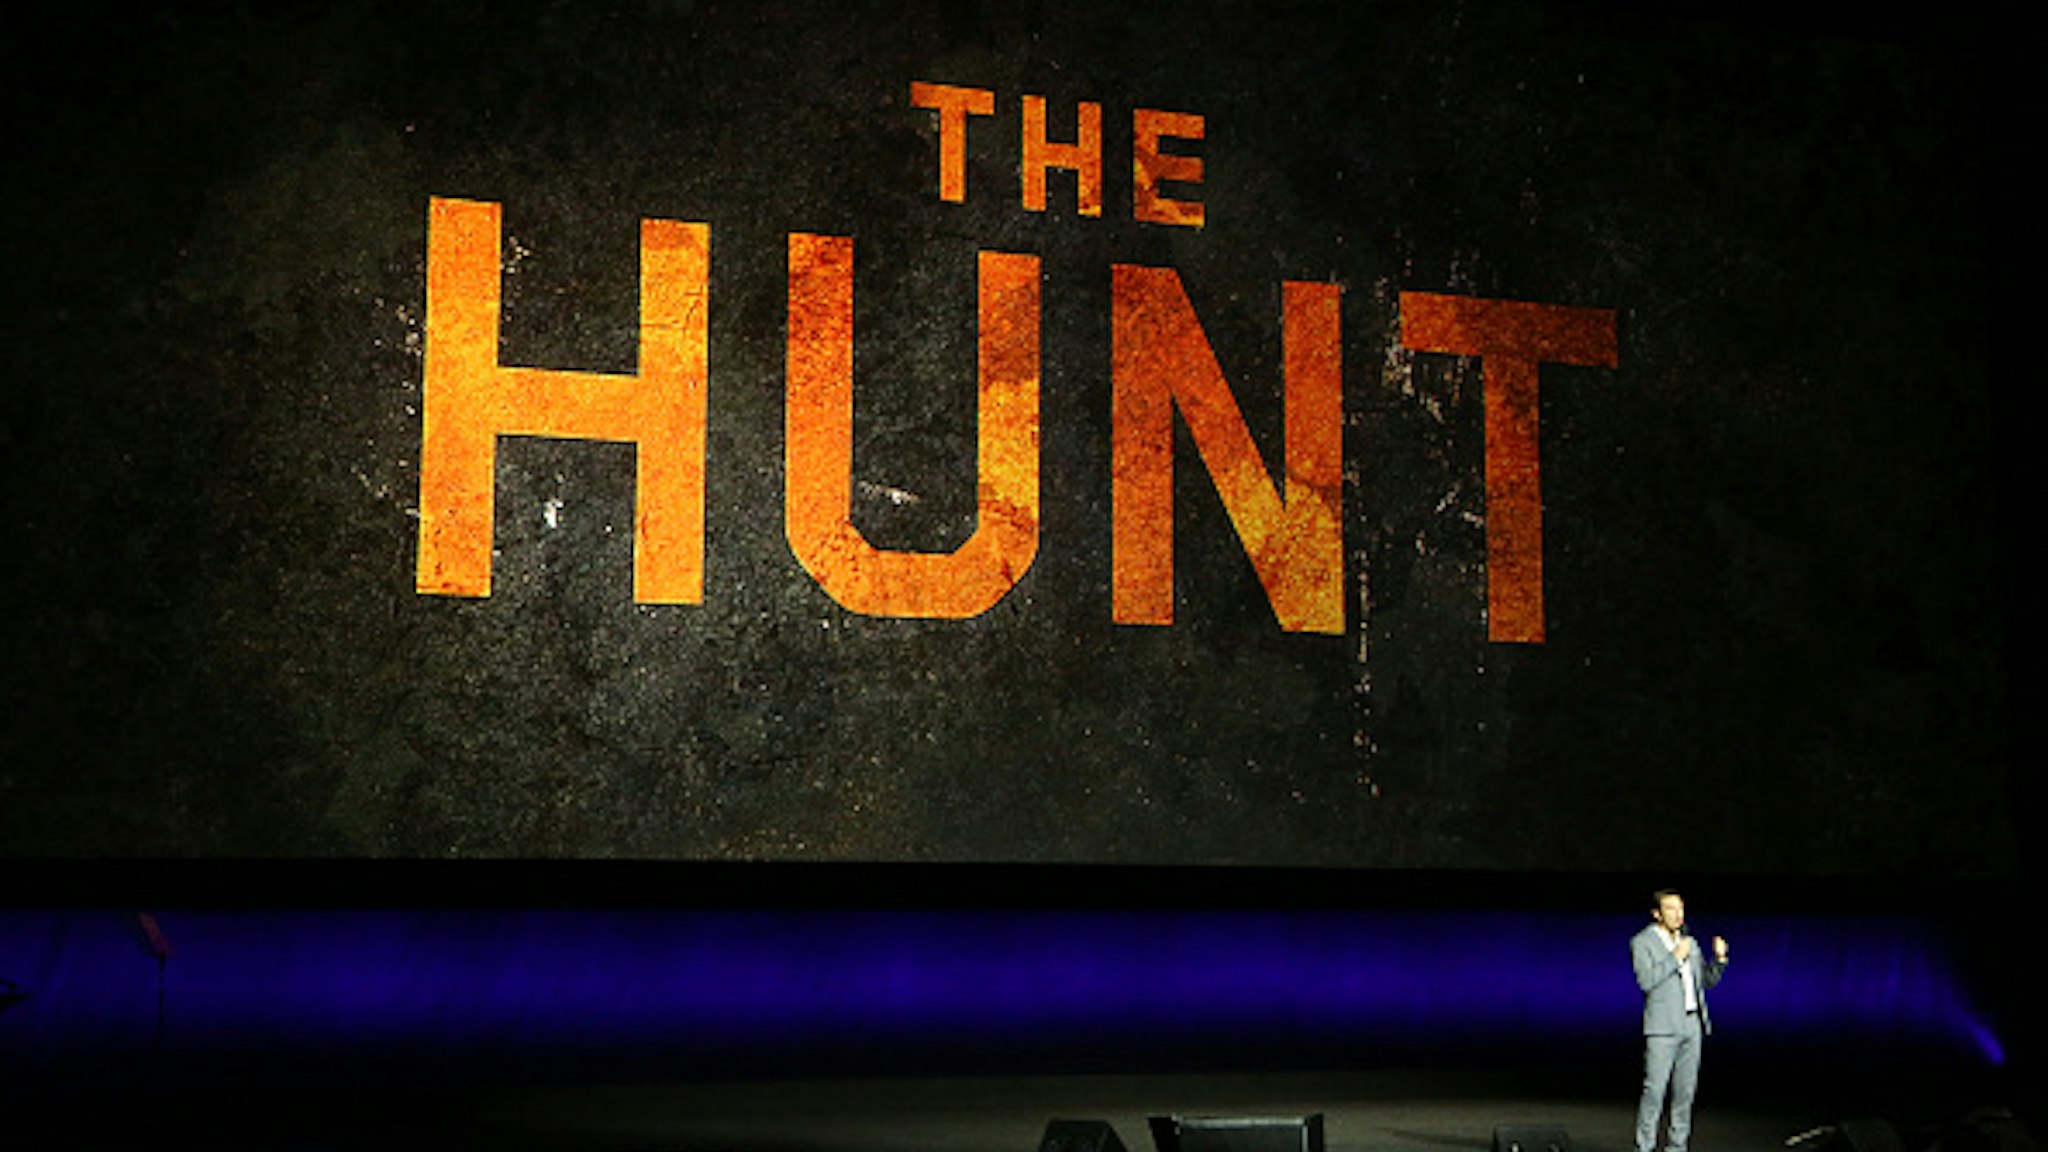 LAS VEGAS, NEVADA - APRIL 03: Producer Jason Blum talks about the upcoming movie "The Hunt" during Universal Pictures special presentation during CinemaCon at The Colosseum at Caesars Palace on April 03, 2019 in Las Vegas, Nevada. CinemaCon is the official convention of the National Association of Theatre Owners.